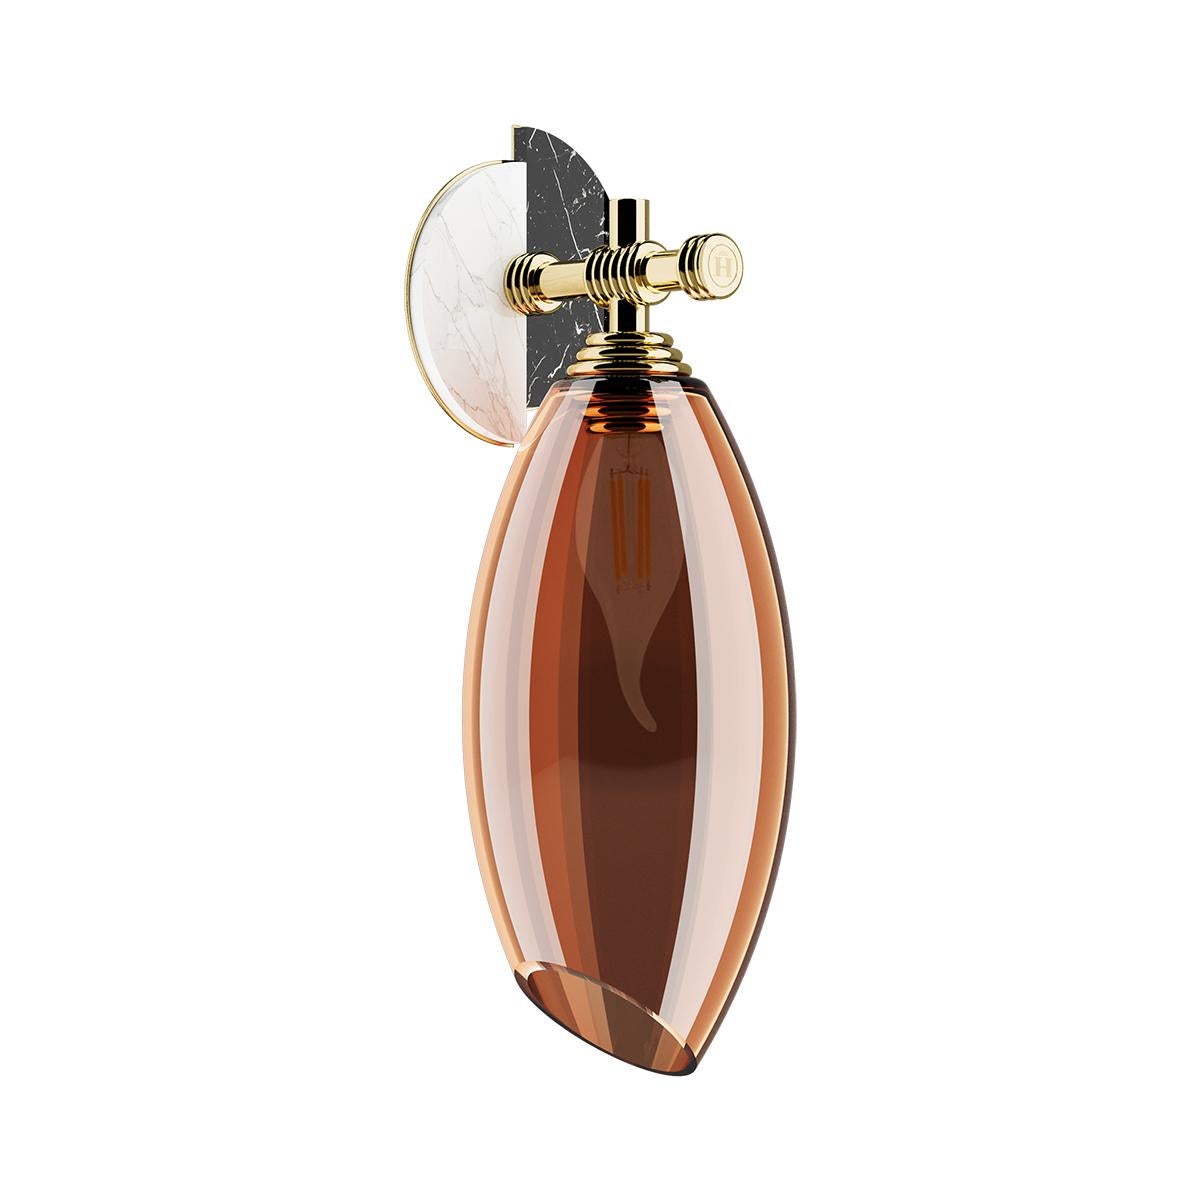 Cocoon Sconce was inspired by the shapes of Art Deco jewels. A modern sconce designed to bring elegance and character to any living area. A luxury wall lamp for a high-end interior design project.

Materials: Structure in Polished Brass; Amber